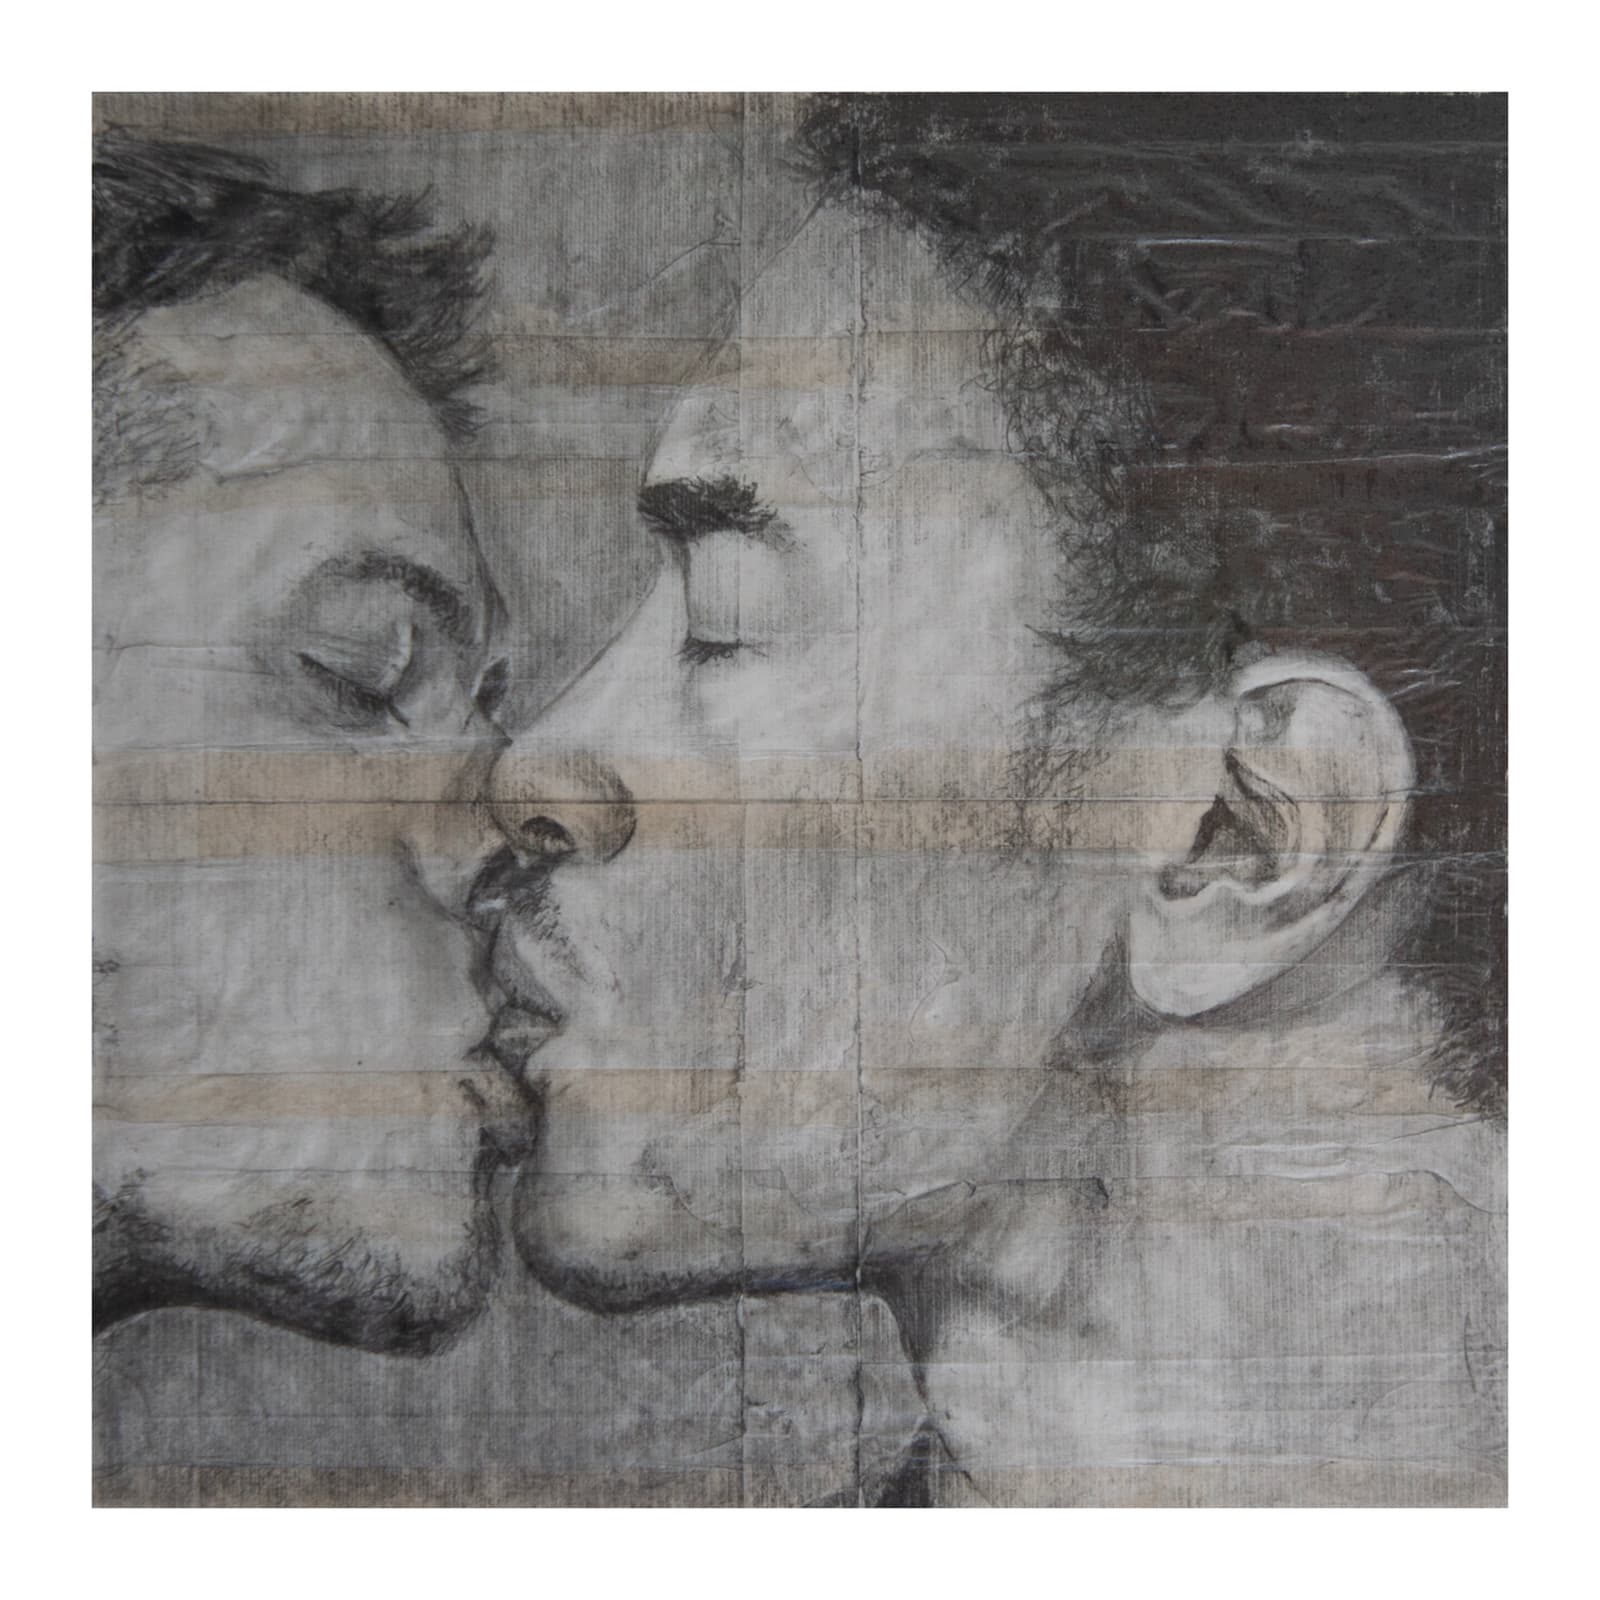 There is never more than a fag paper between them- Nathan and Jeremiah- Pencil Artwork on Fag Paper thumbnail-0